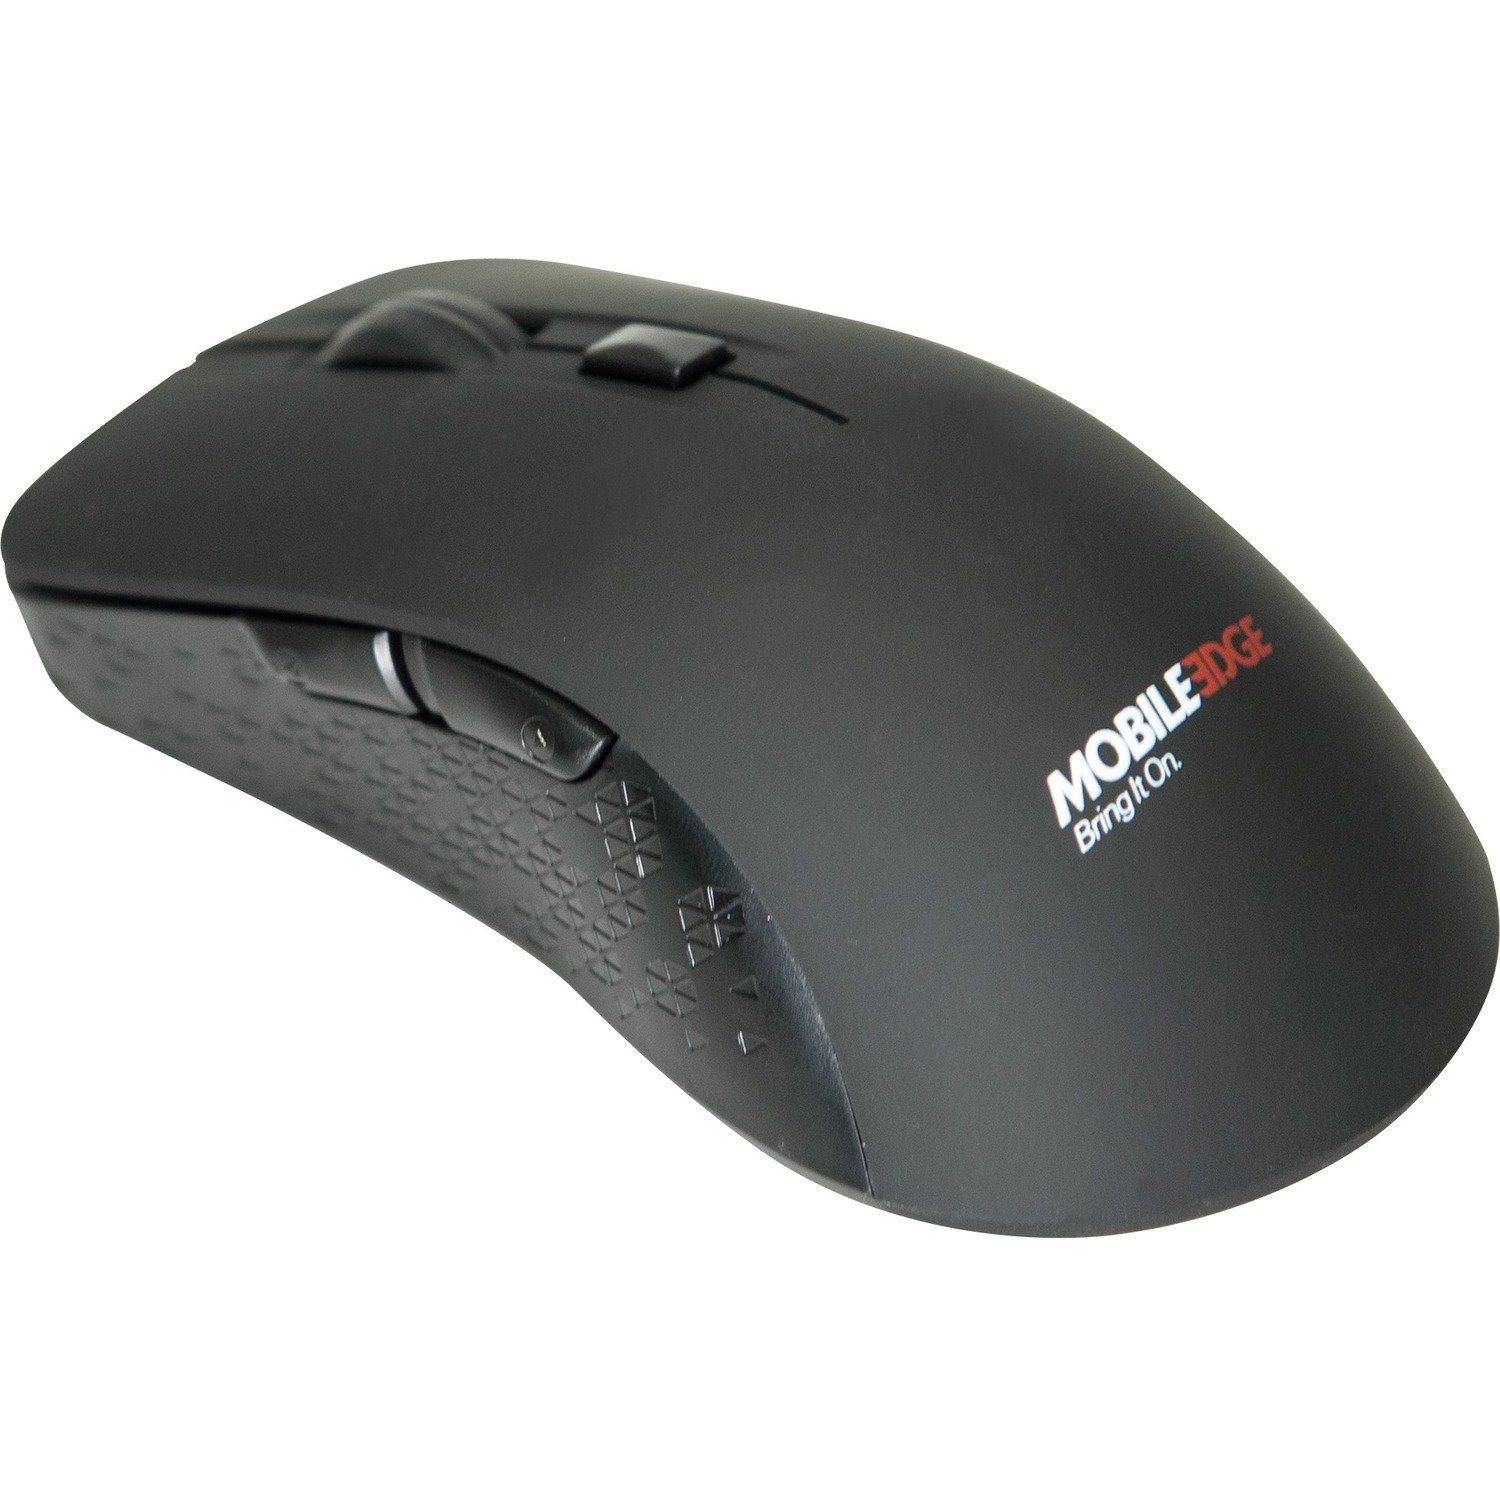 Rechargable Wireless 6 Button Mouse